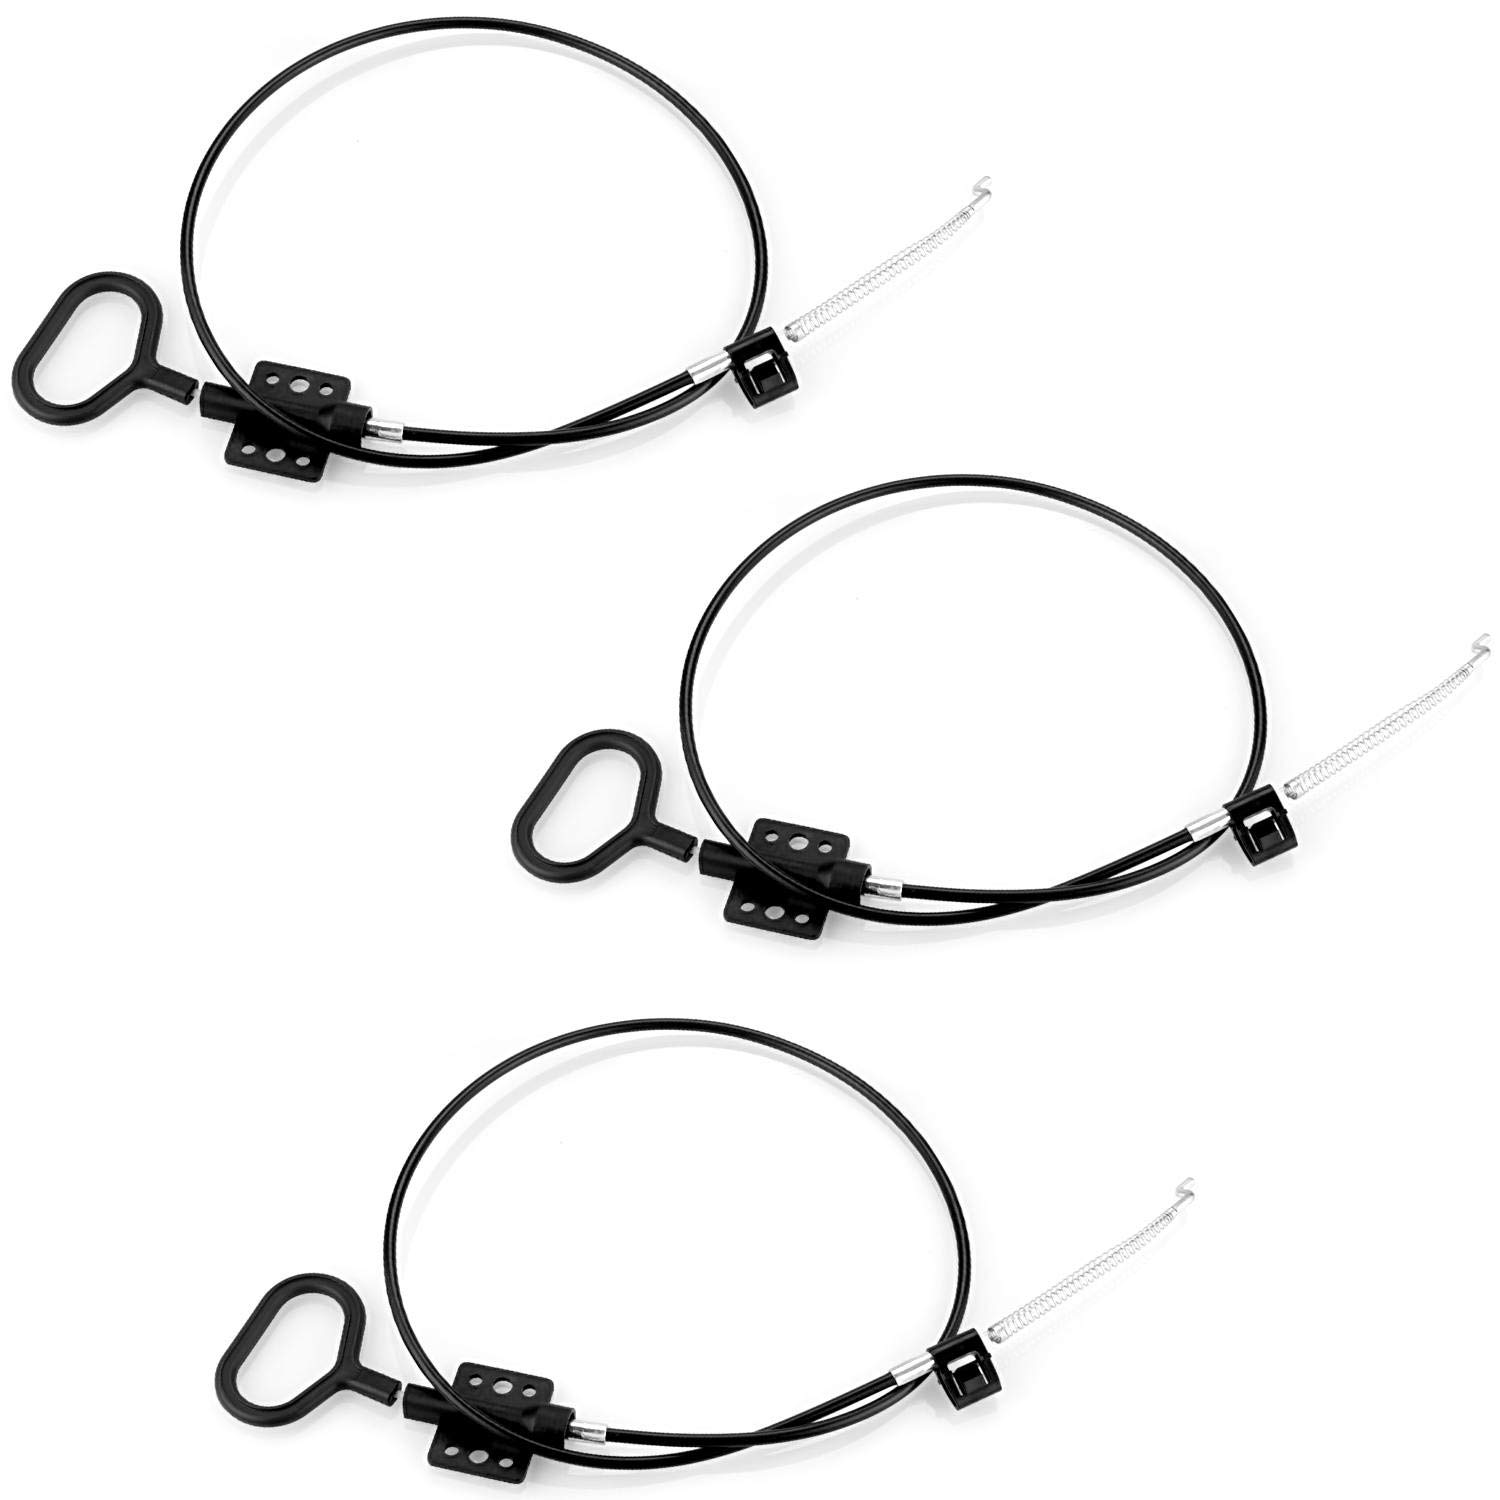 STARVAST Sofa Recliner Cables, 3 Pcs D-Ring Recliner Release Cables Couch Recliner Replacement Part Pull Handle Cable, Hook Exposed Cable Length (4.75") Total Length 36.5 Inch